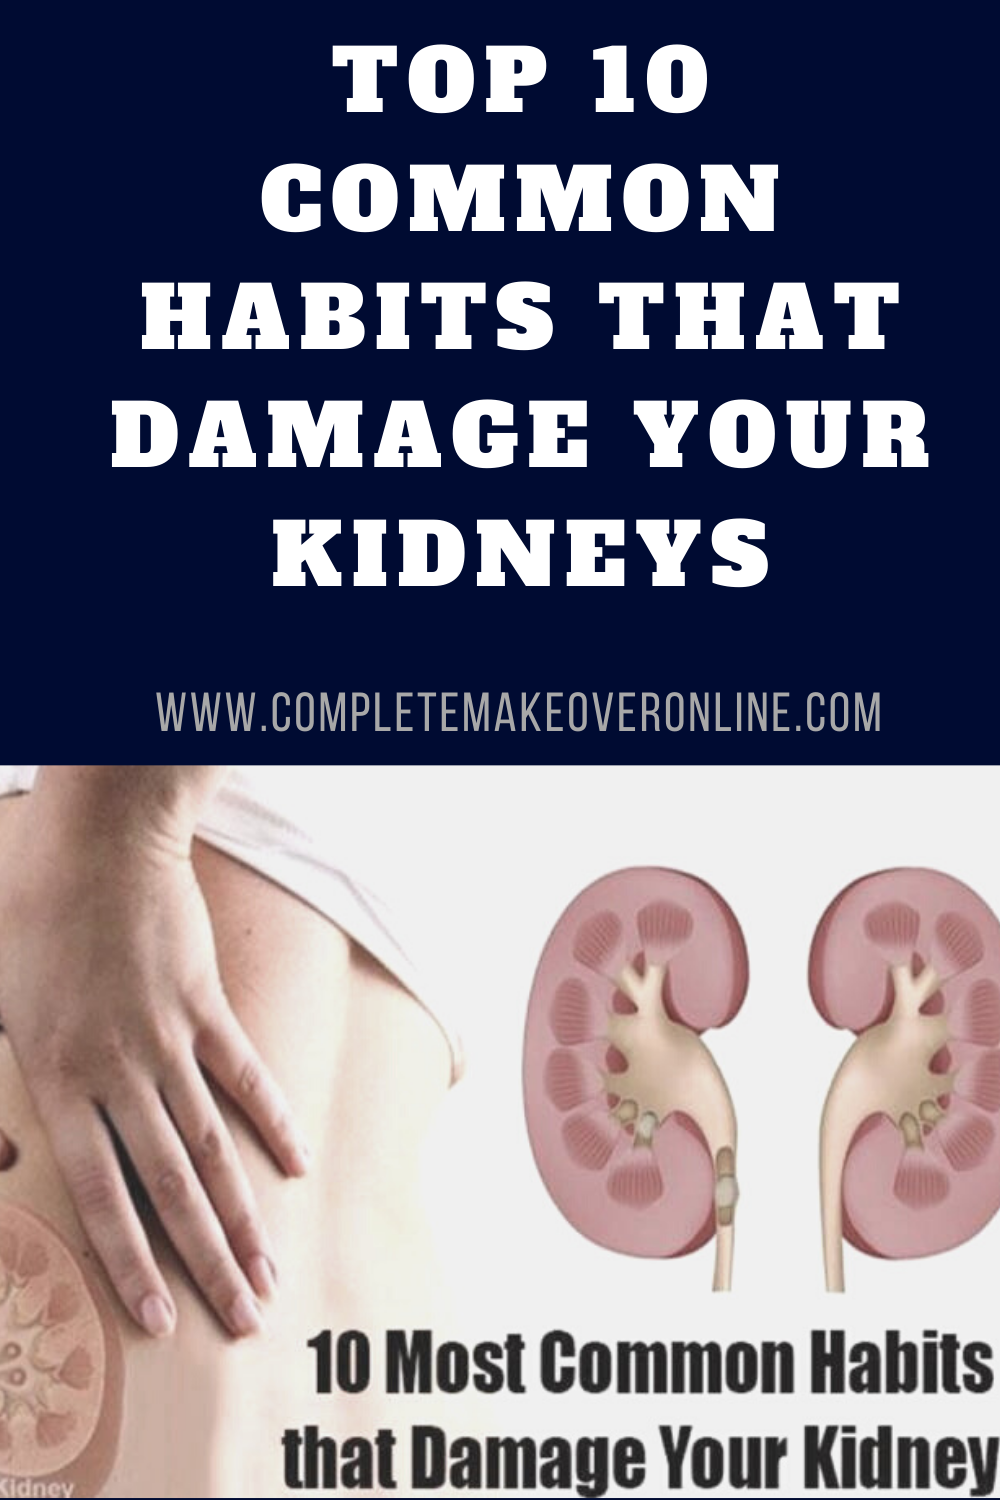 Top 10 Common Habits that Damage Your Kidneys – Complete Makeover